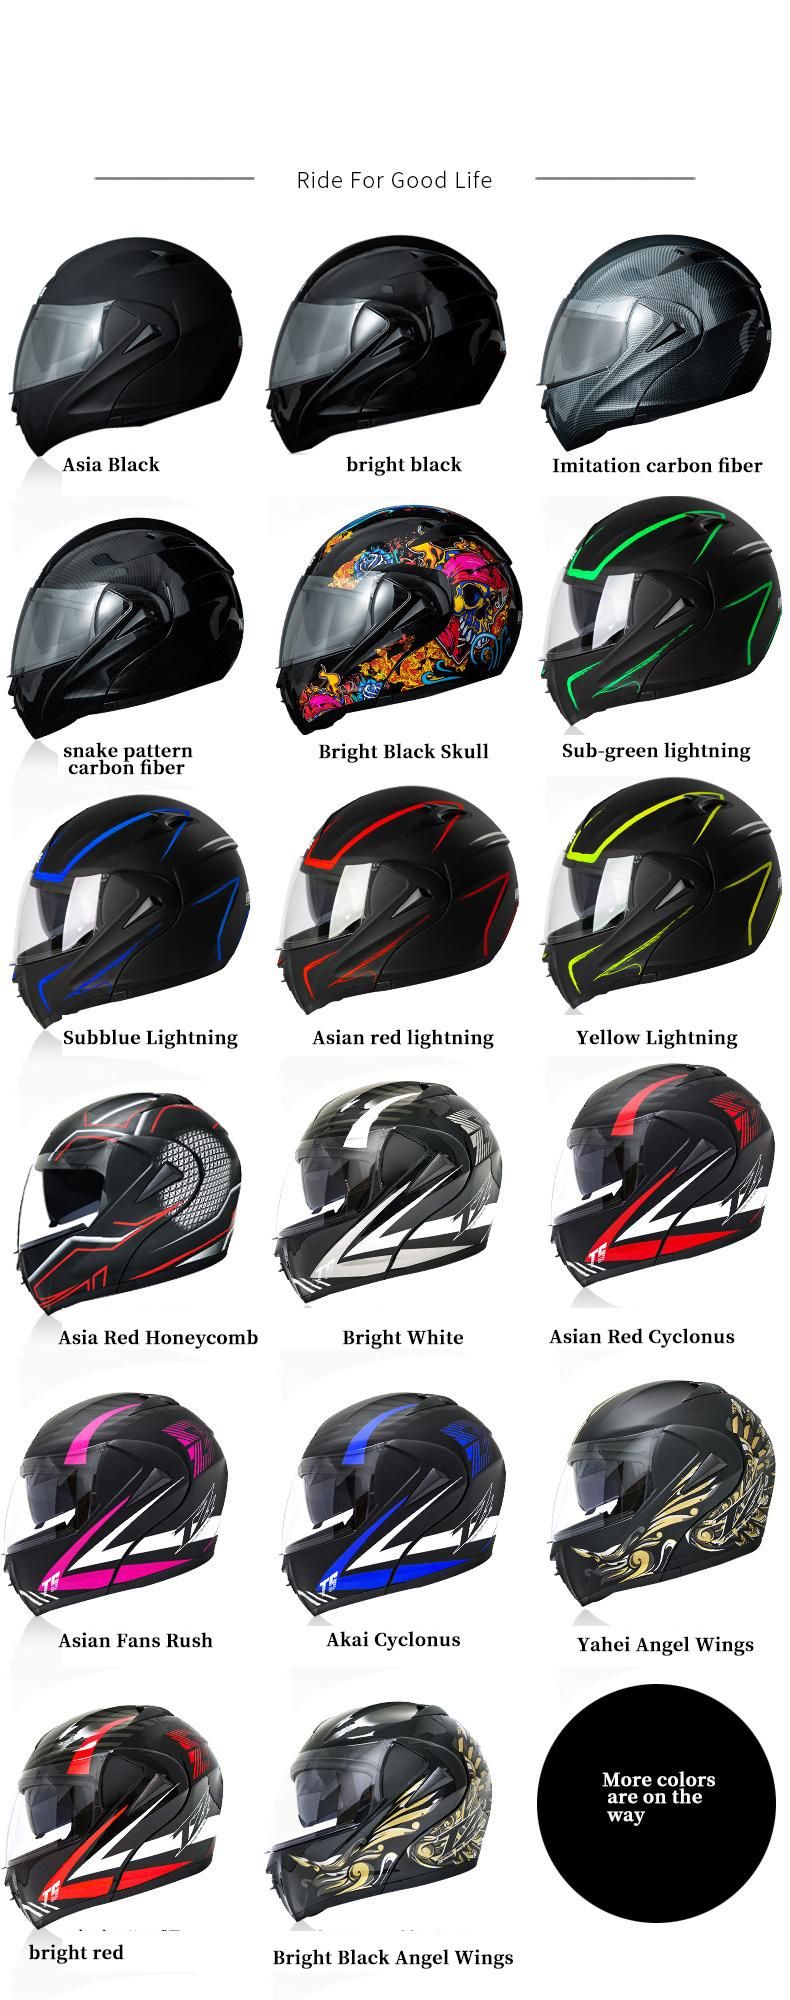 Factory Hot Selling Bluetooth Bright Black Colorful Mirror Motorcycle Accessories Helmetmotorcycle Safety Helmethelmet Motorcycle Retro